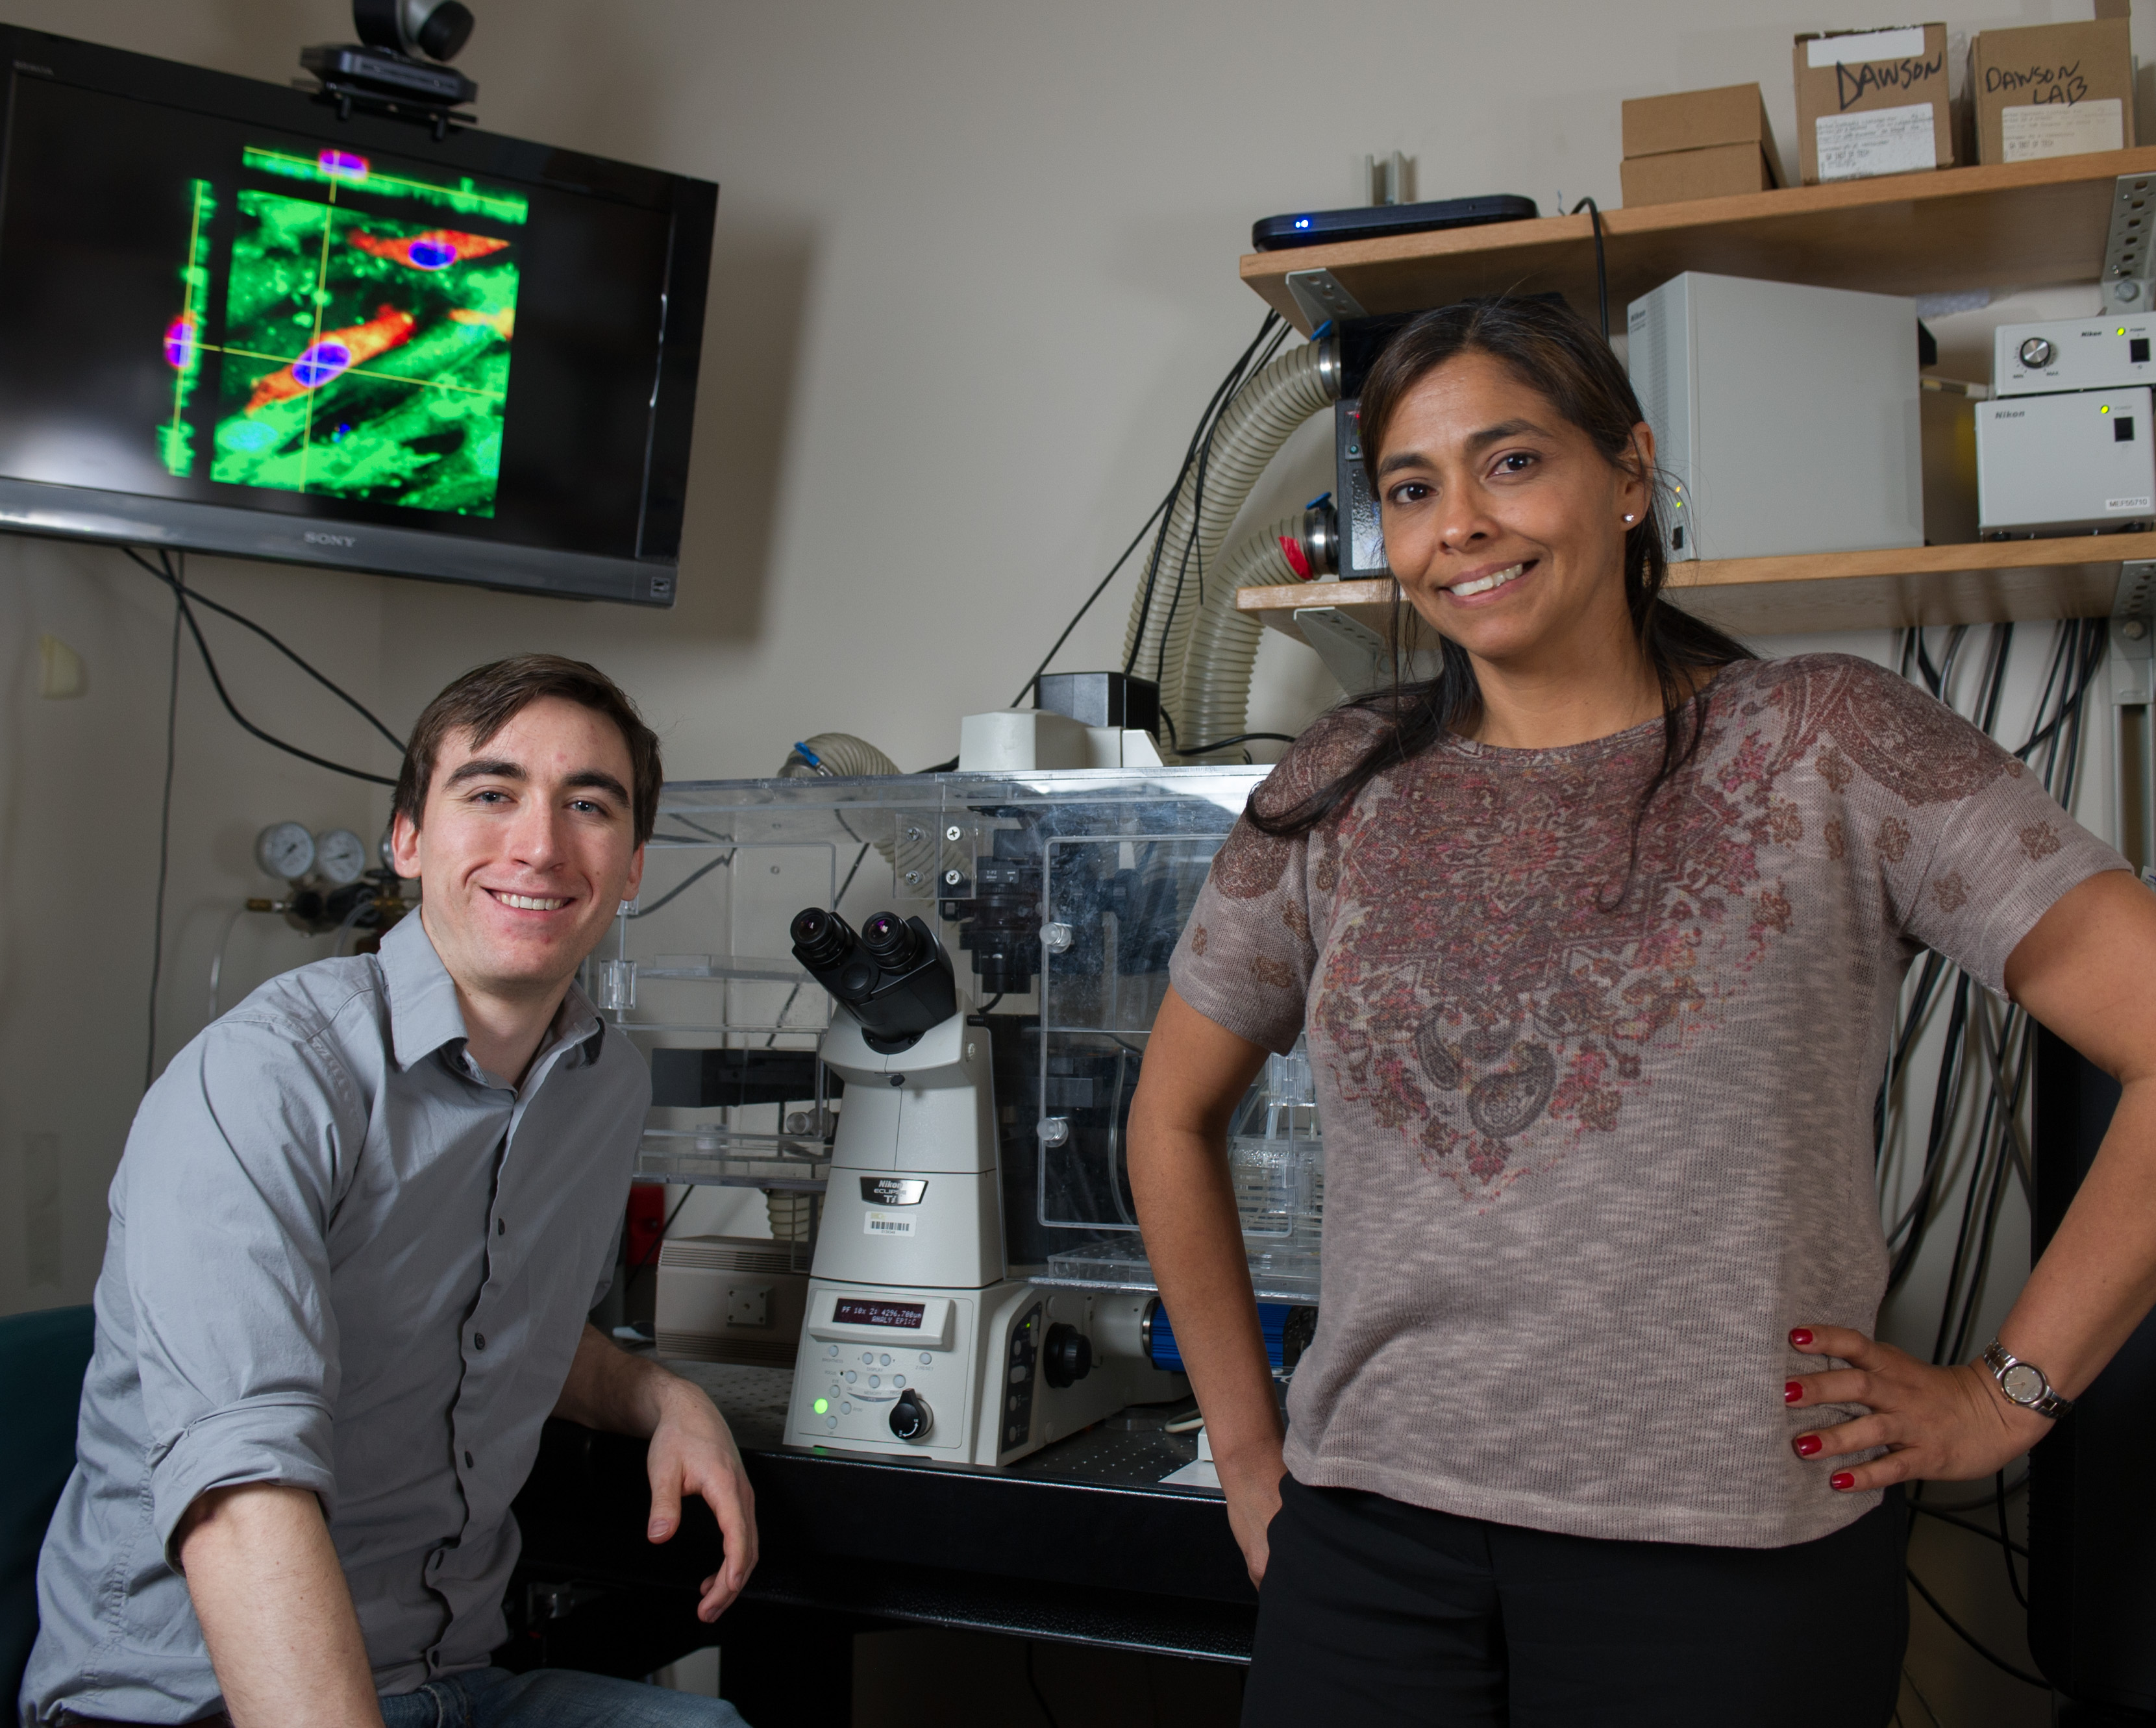 Professor Michelle Dawson and graduate student Daniel McGrail used traction force microscopy to measure the forces exerted by cancer cells on soft and stiff surfaces. Rob Felt, Georgia Institute of Technology